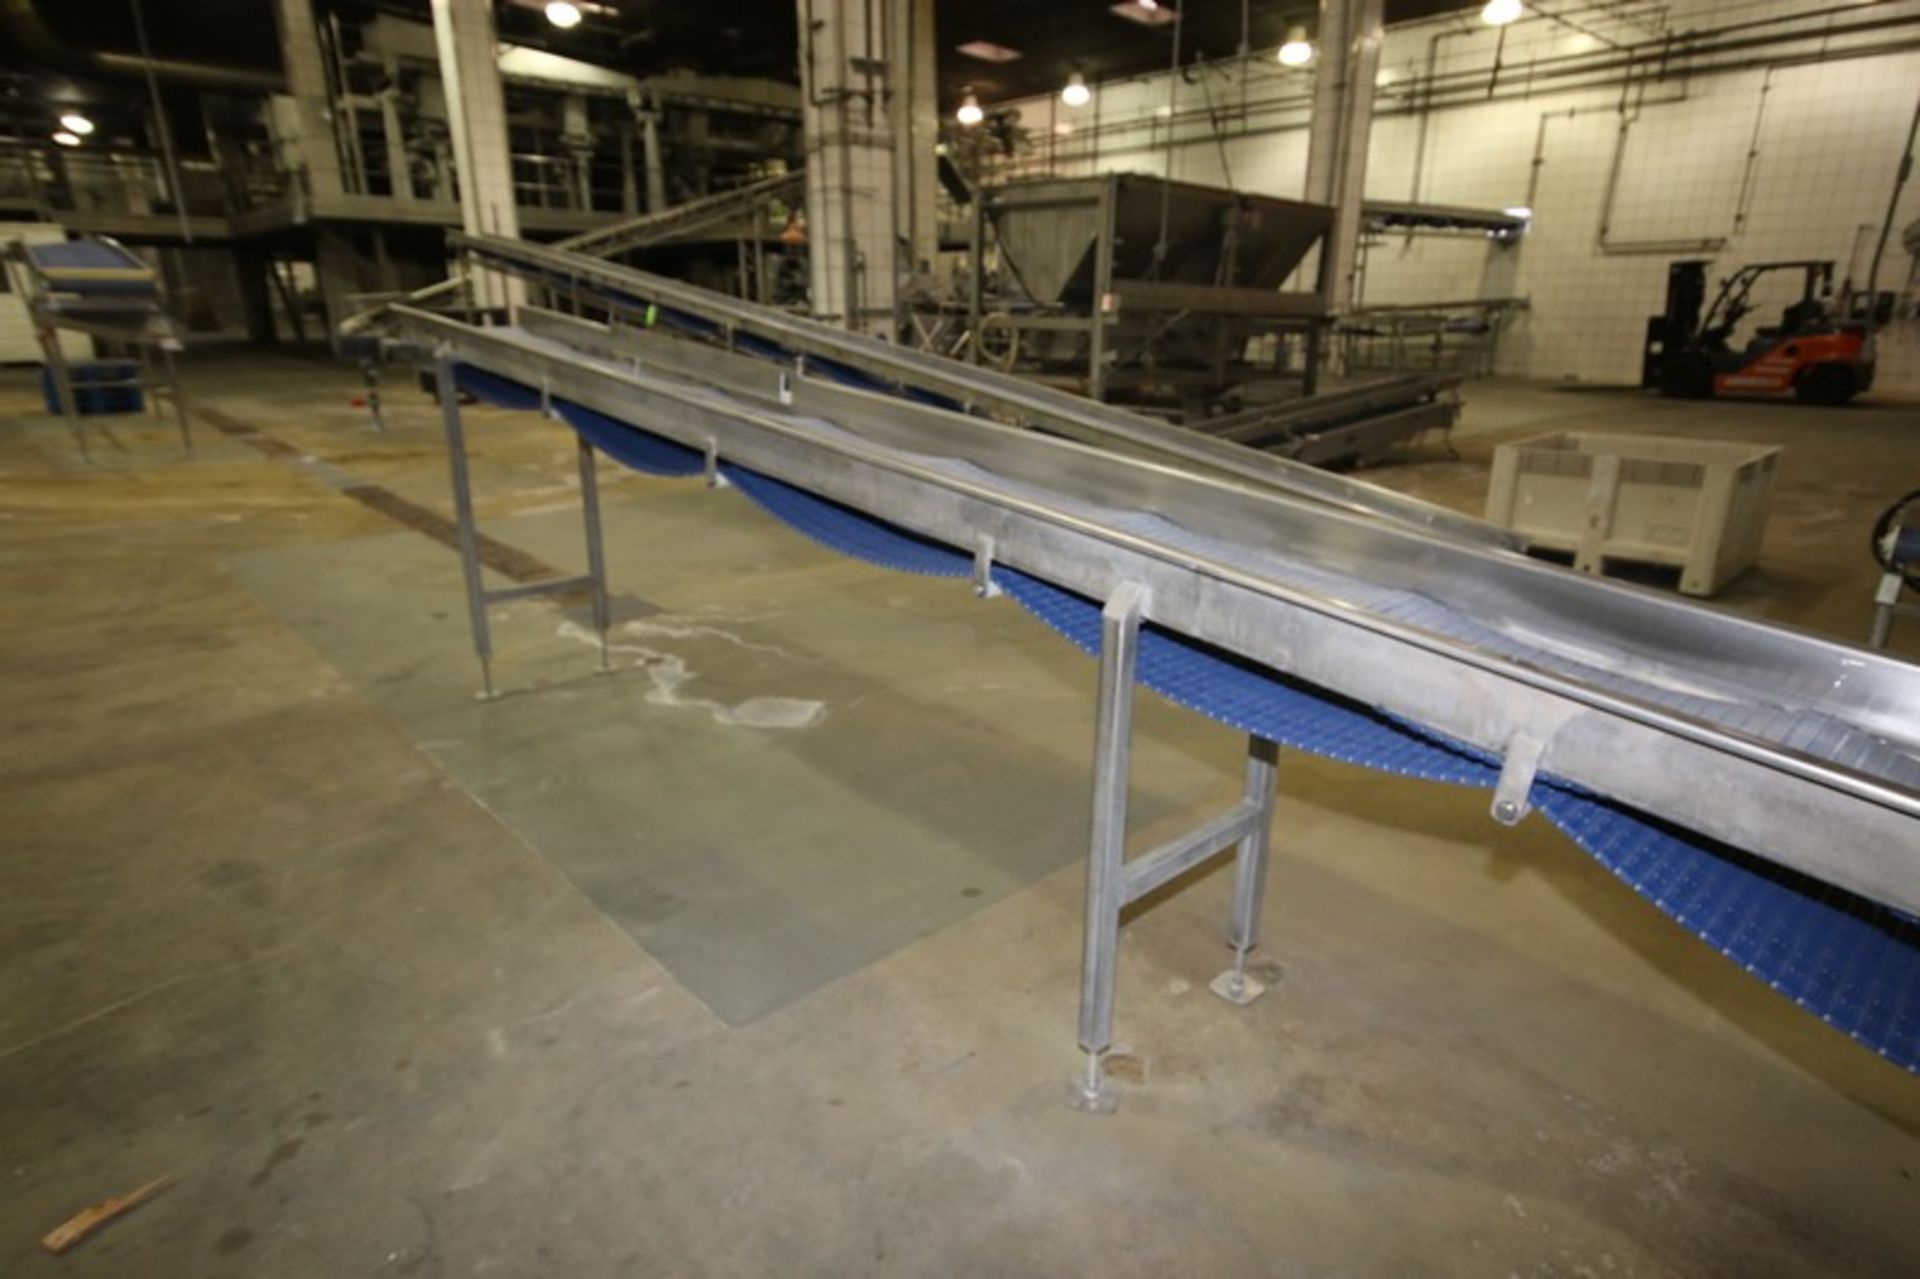 S/S Incline Conveyor with S/S Walls, with S/S Infeed Chute, Aprox. 35' L x 18" W, Hydraulic Operated - Image 2 of 3